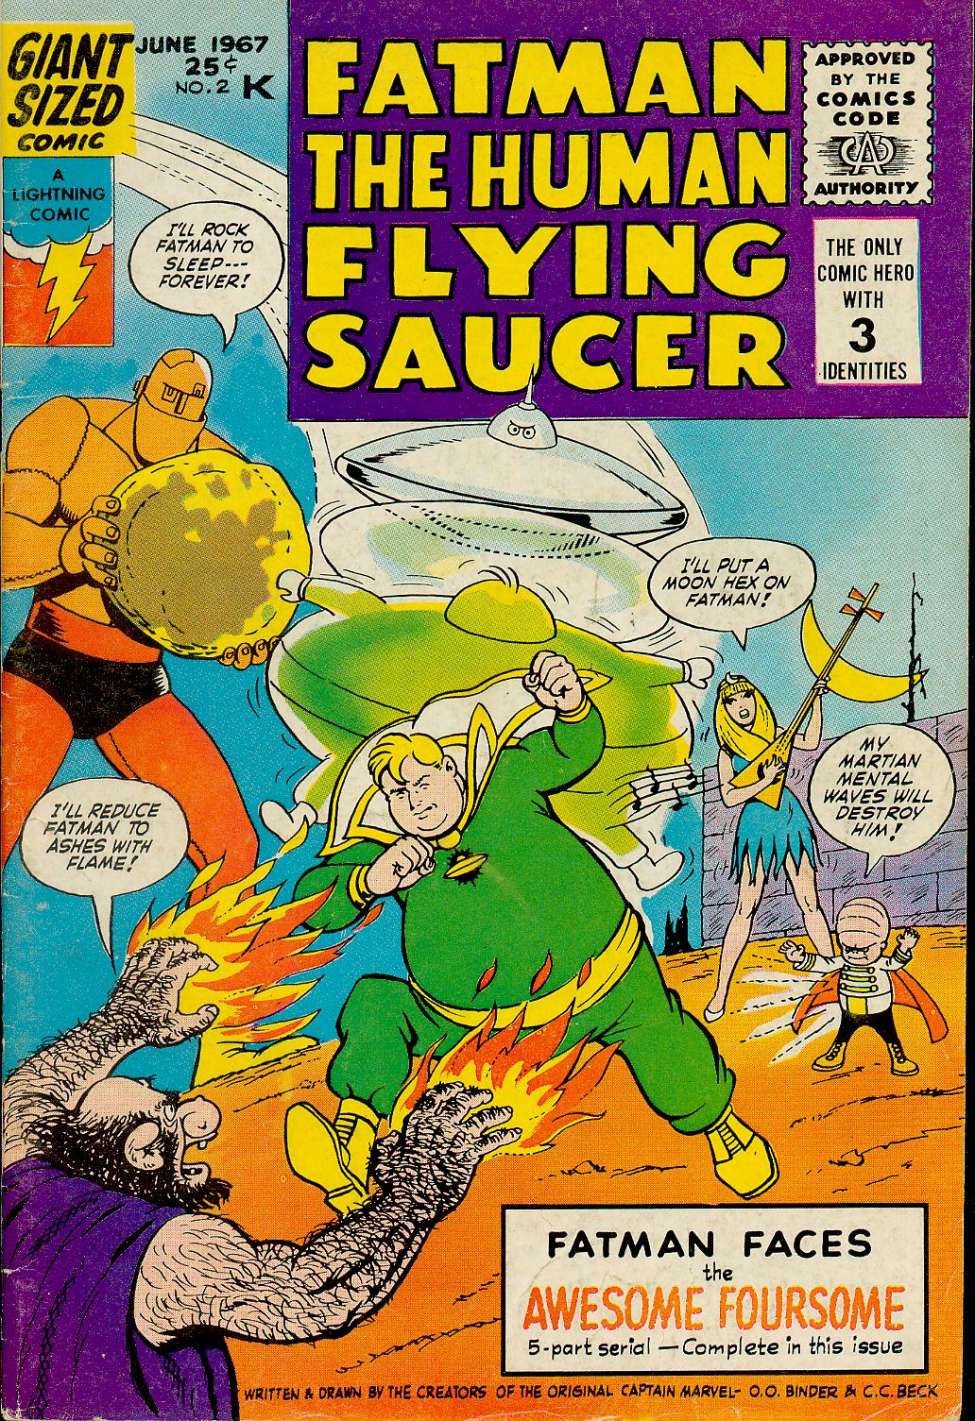 Book Cover For Fatman the Human Flying Saucer 2